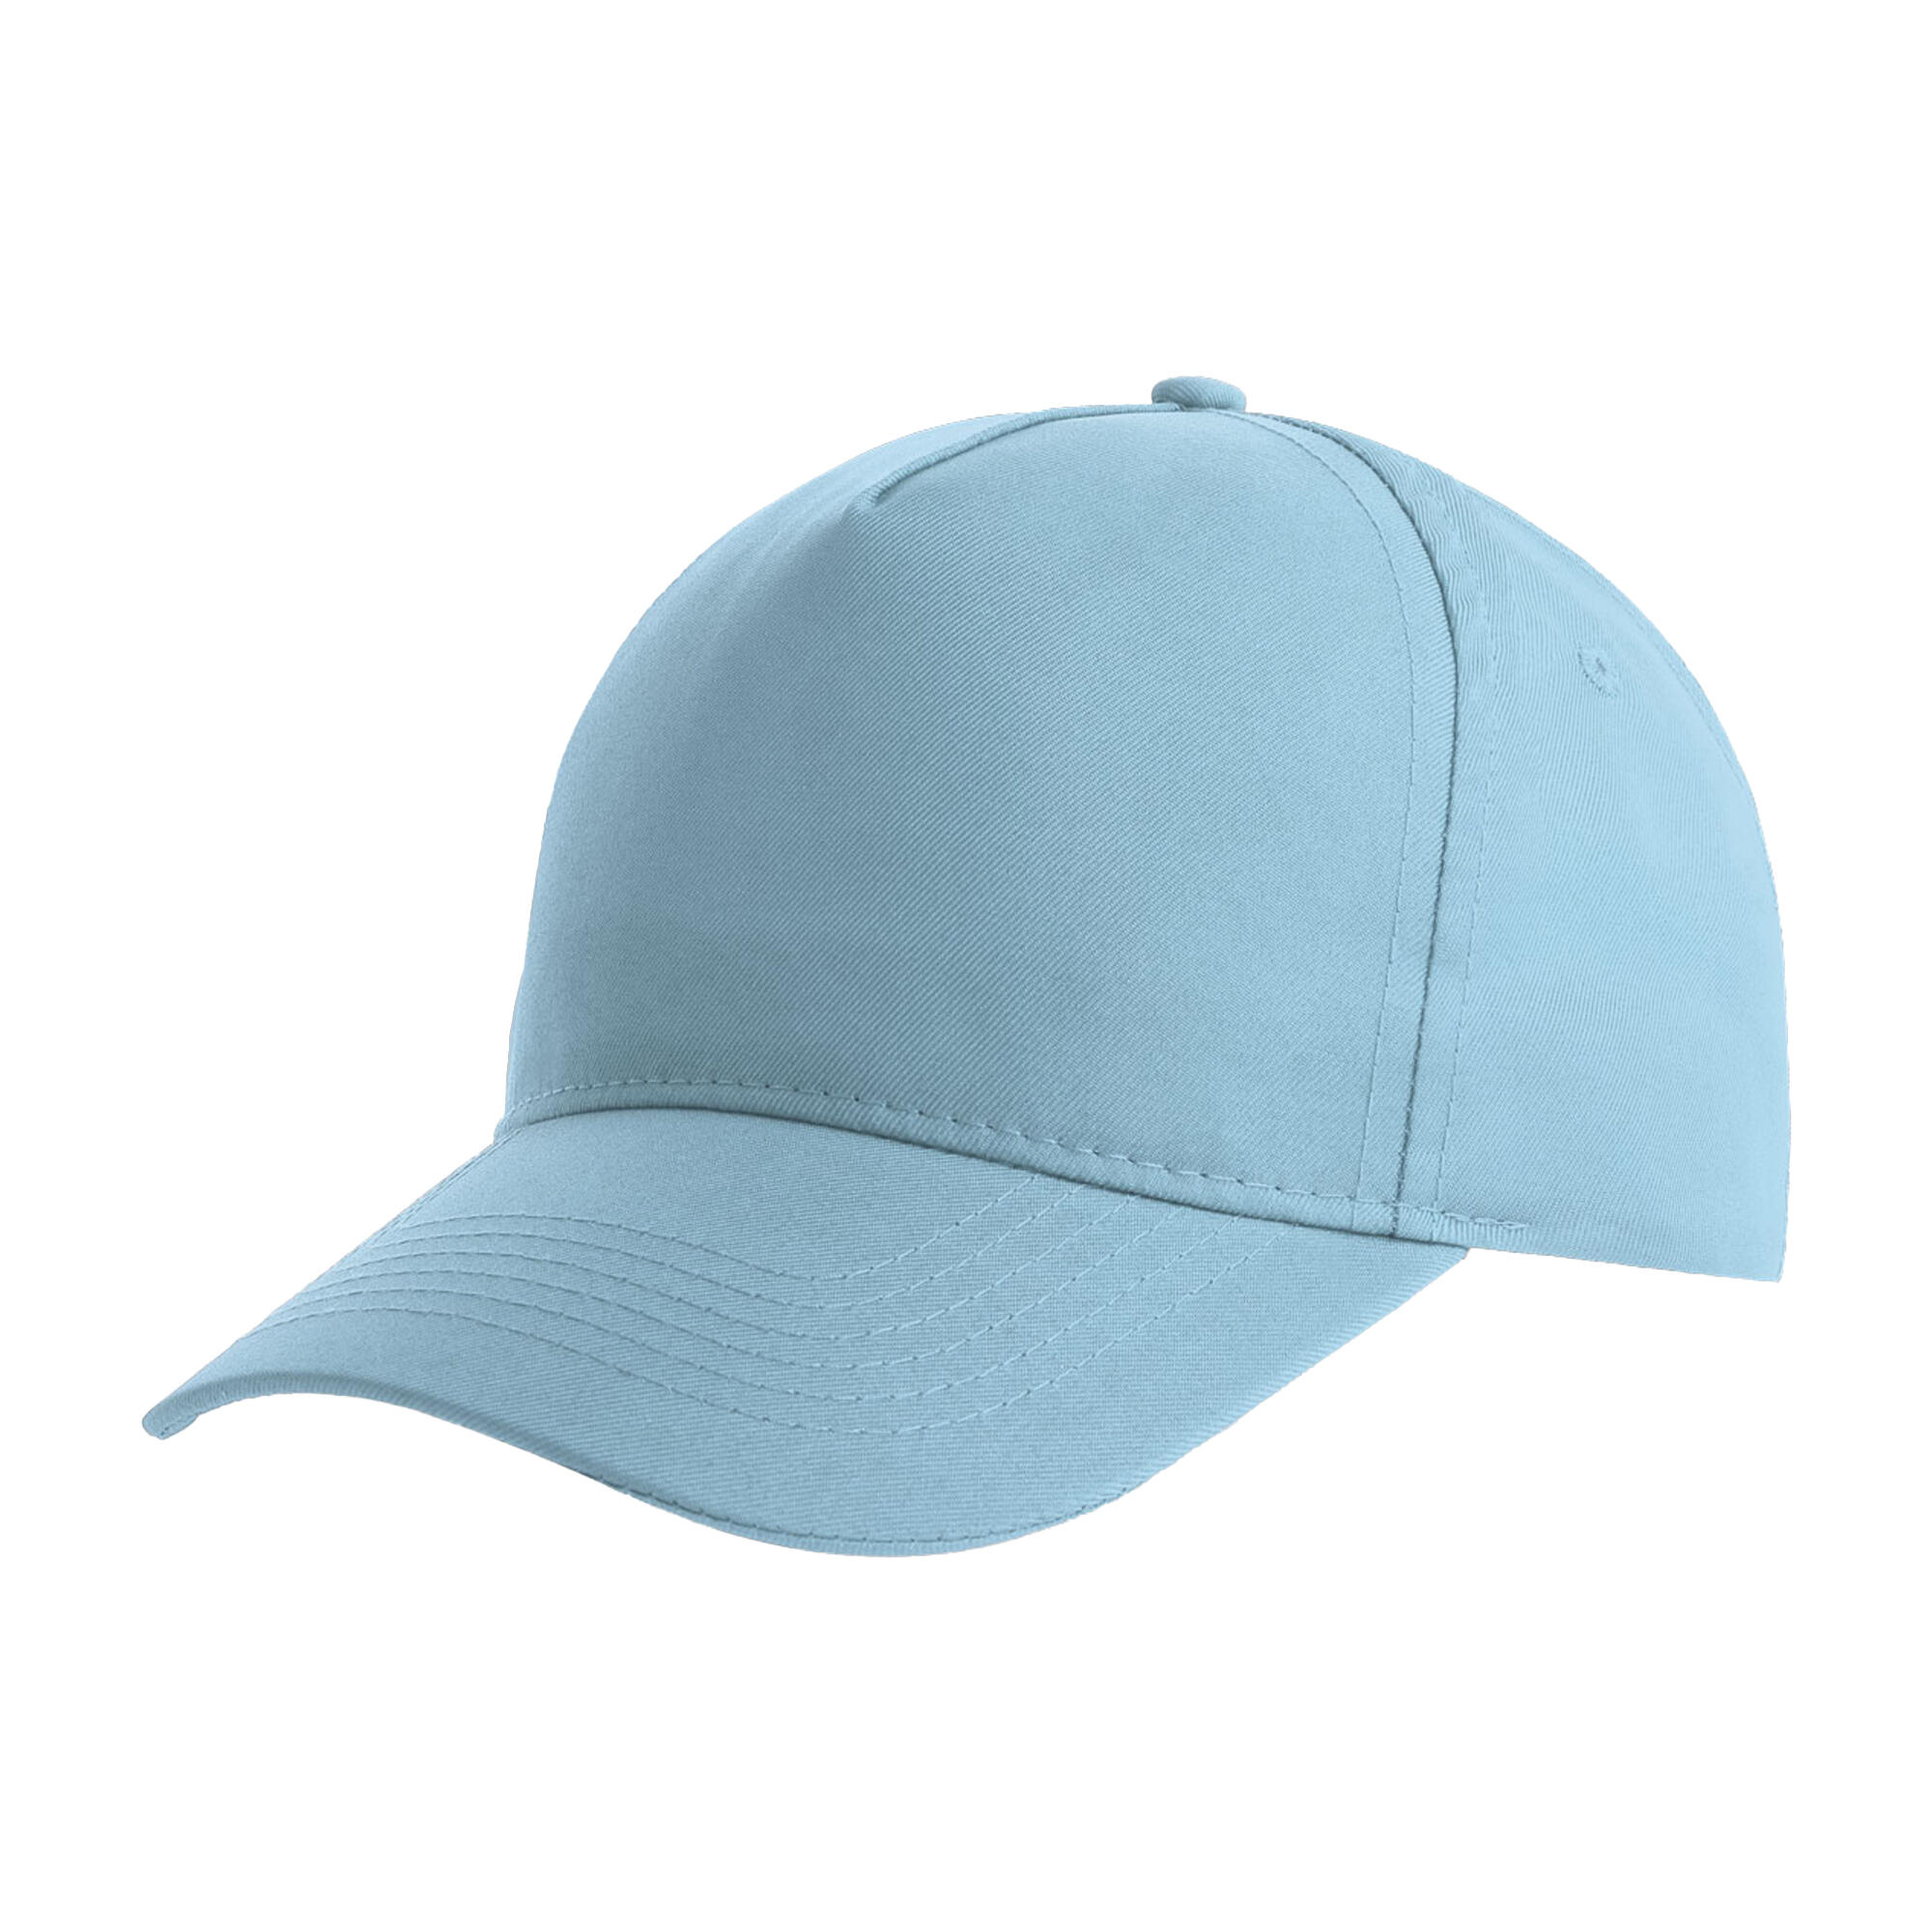 Childrens/Kids Recy Five 5 Panel Recycled Baseball Cap (Light Blue) 1/3